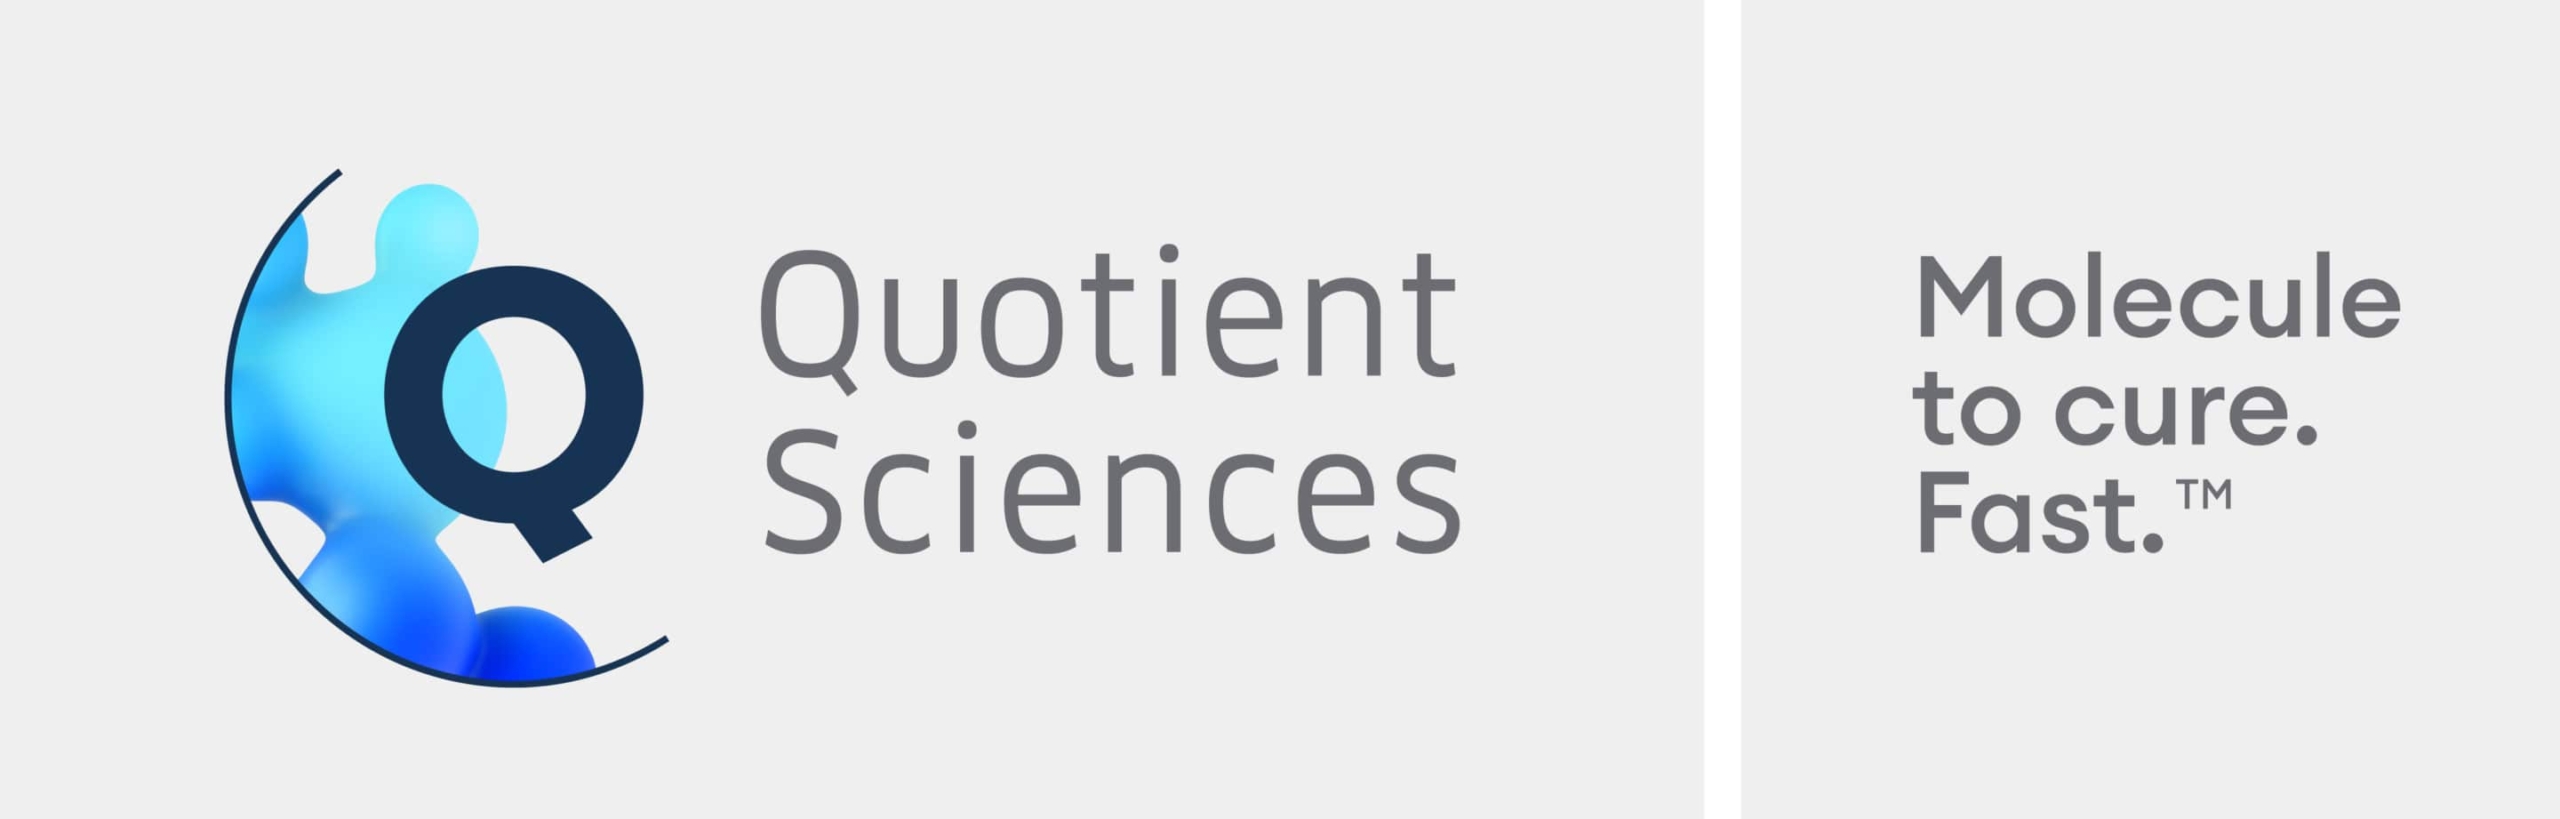 Quotient Sciences Acquires Arcinova, the UK-Based Contract Development and Manufacturing Organization